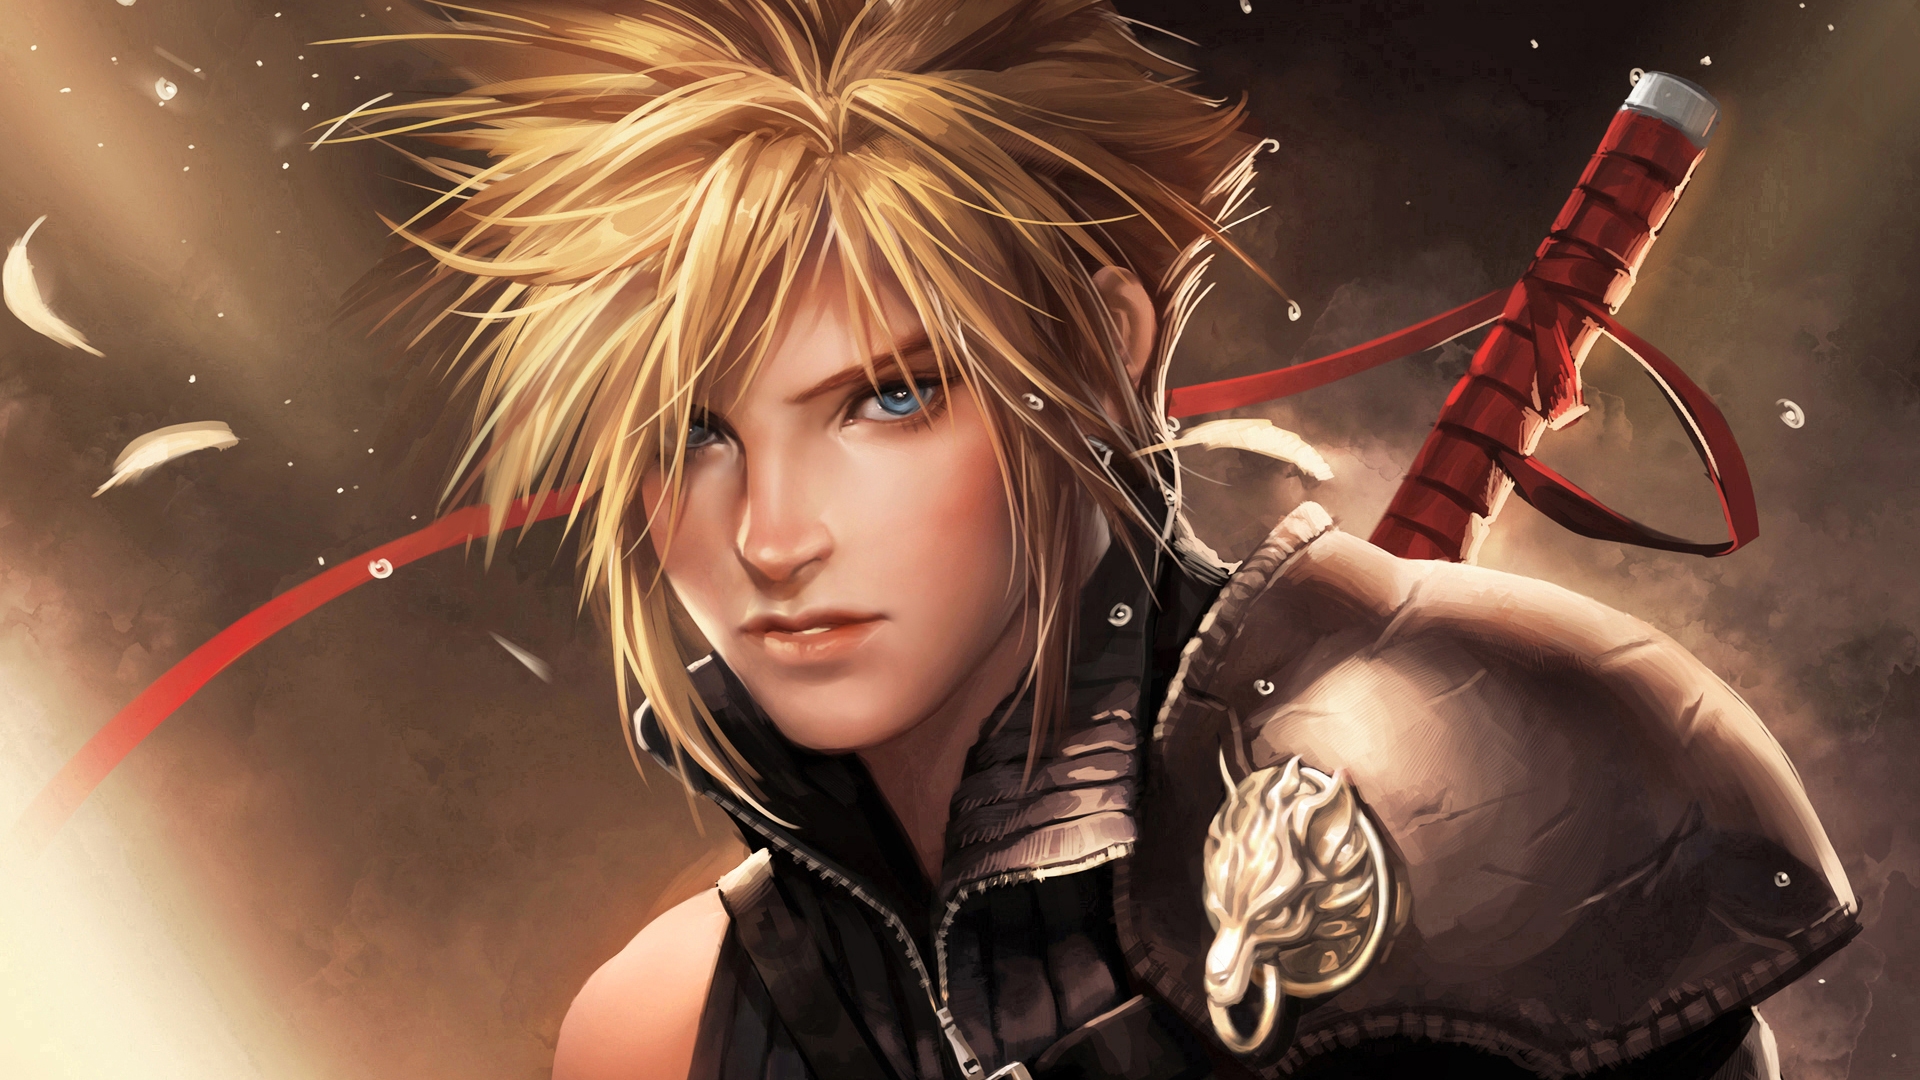 Final Fantasy Soldier for 1920 x 1080 HDTV 1080p resolution